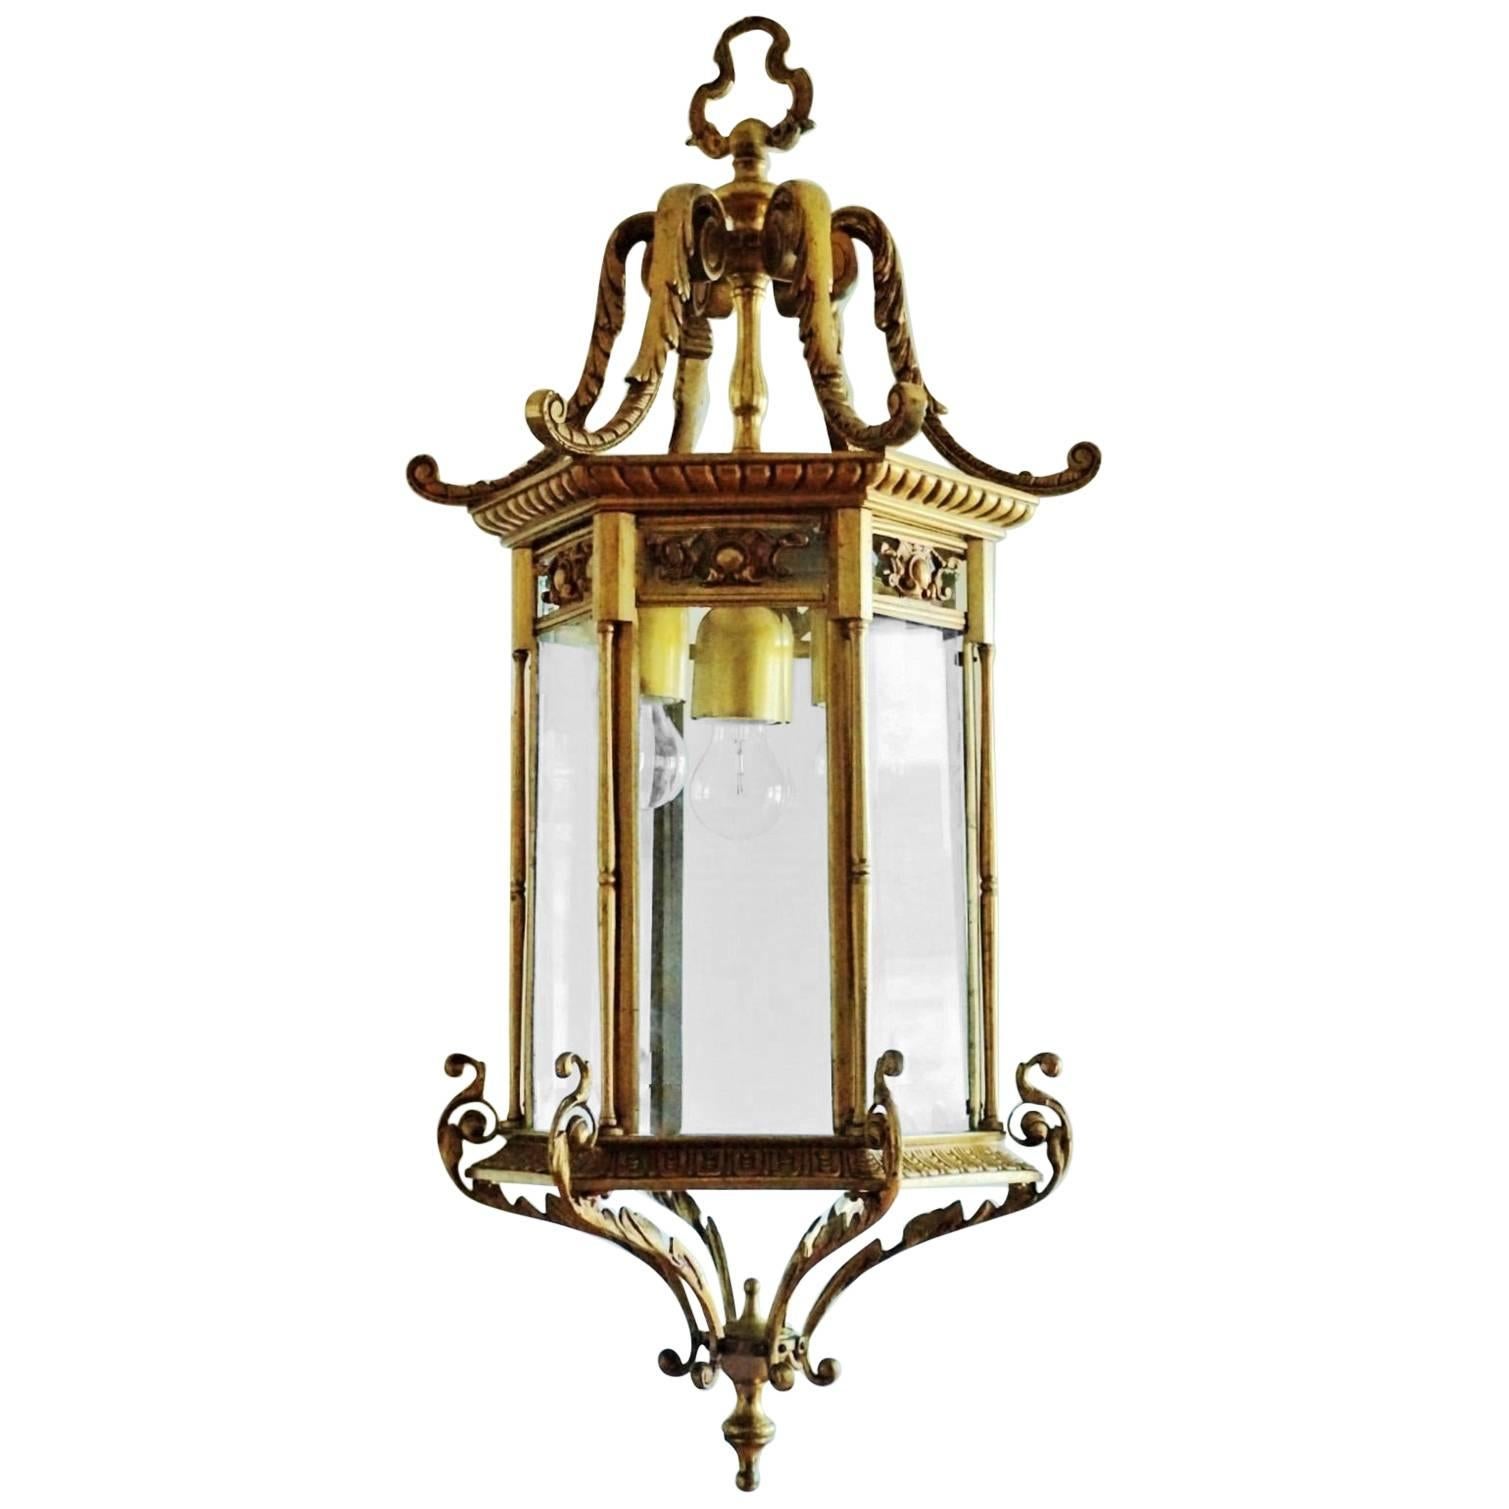 Pair of heavy, large Regency style thee-light lanterns, France, circa 1870-1880. The lanterns are of solid bronze and parcel brass with six faceted glass windows. The lanterns arrive with beautiful solid bronze canopy and chain.
Number of lights: